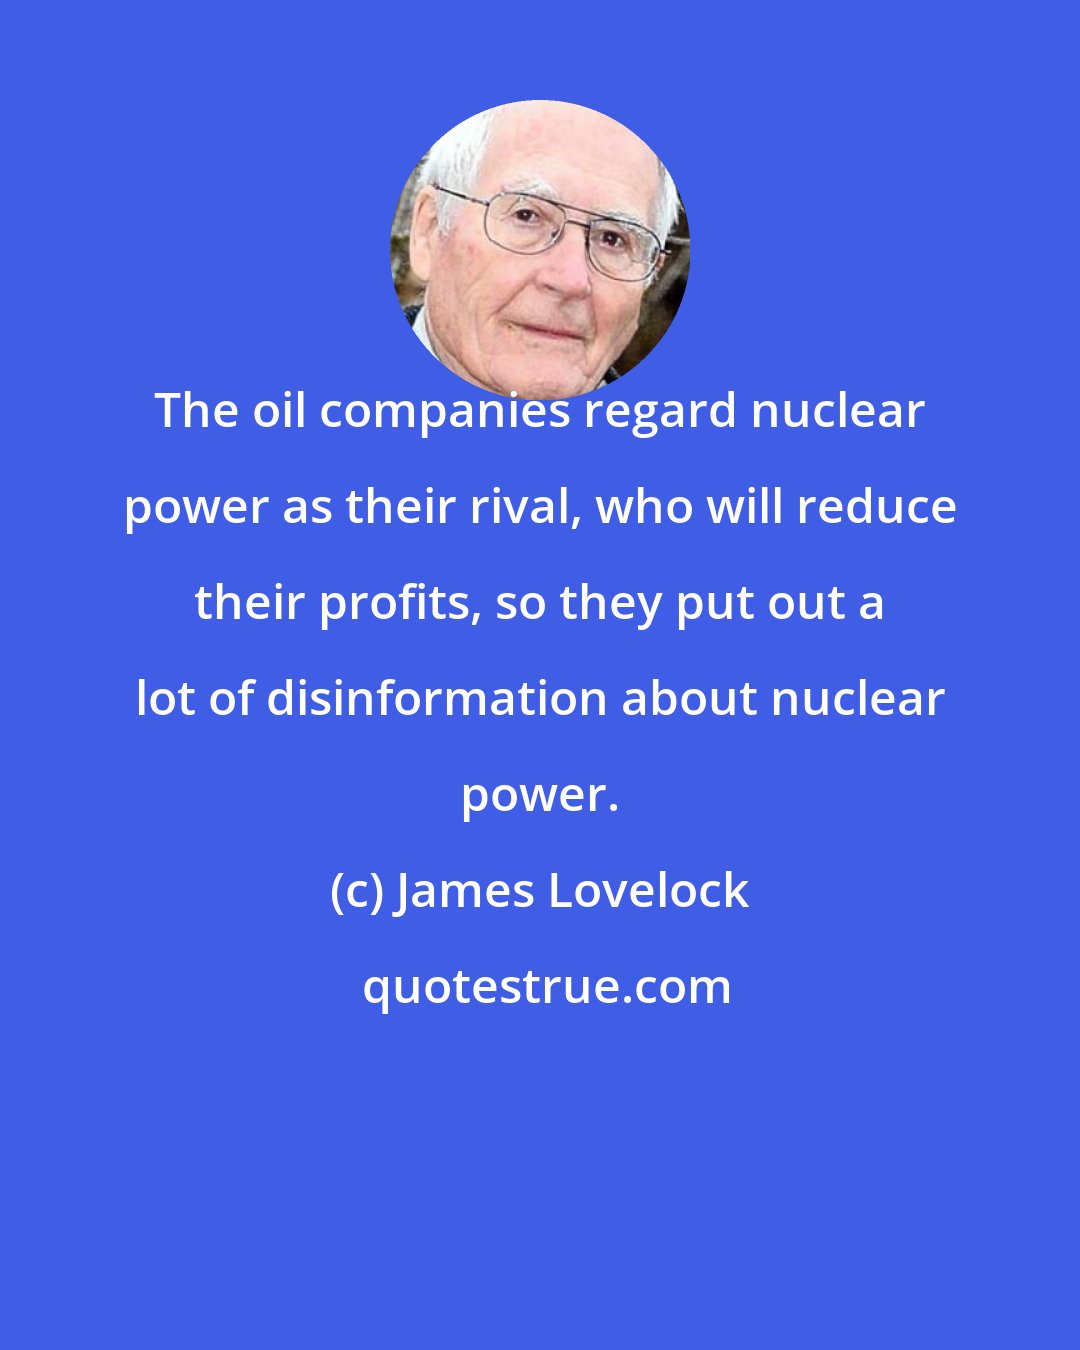 James Lovelock: The oil companies regard nuclear power as their rival, who will reduce their profits, so they put out a lot of disinformation about nuclear power.